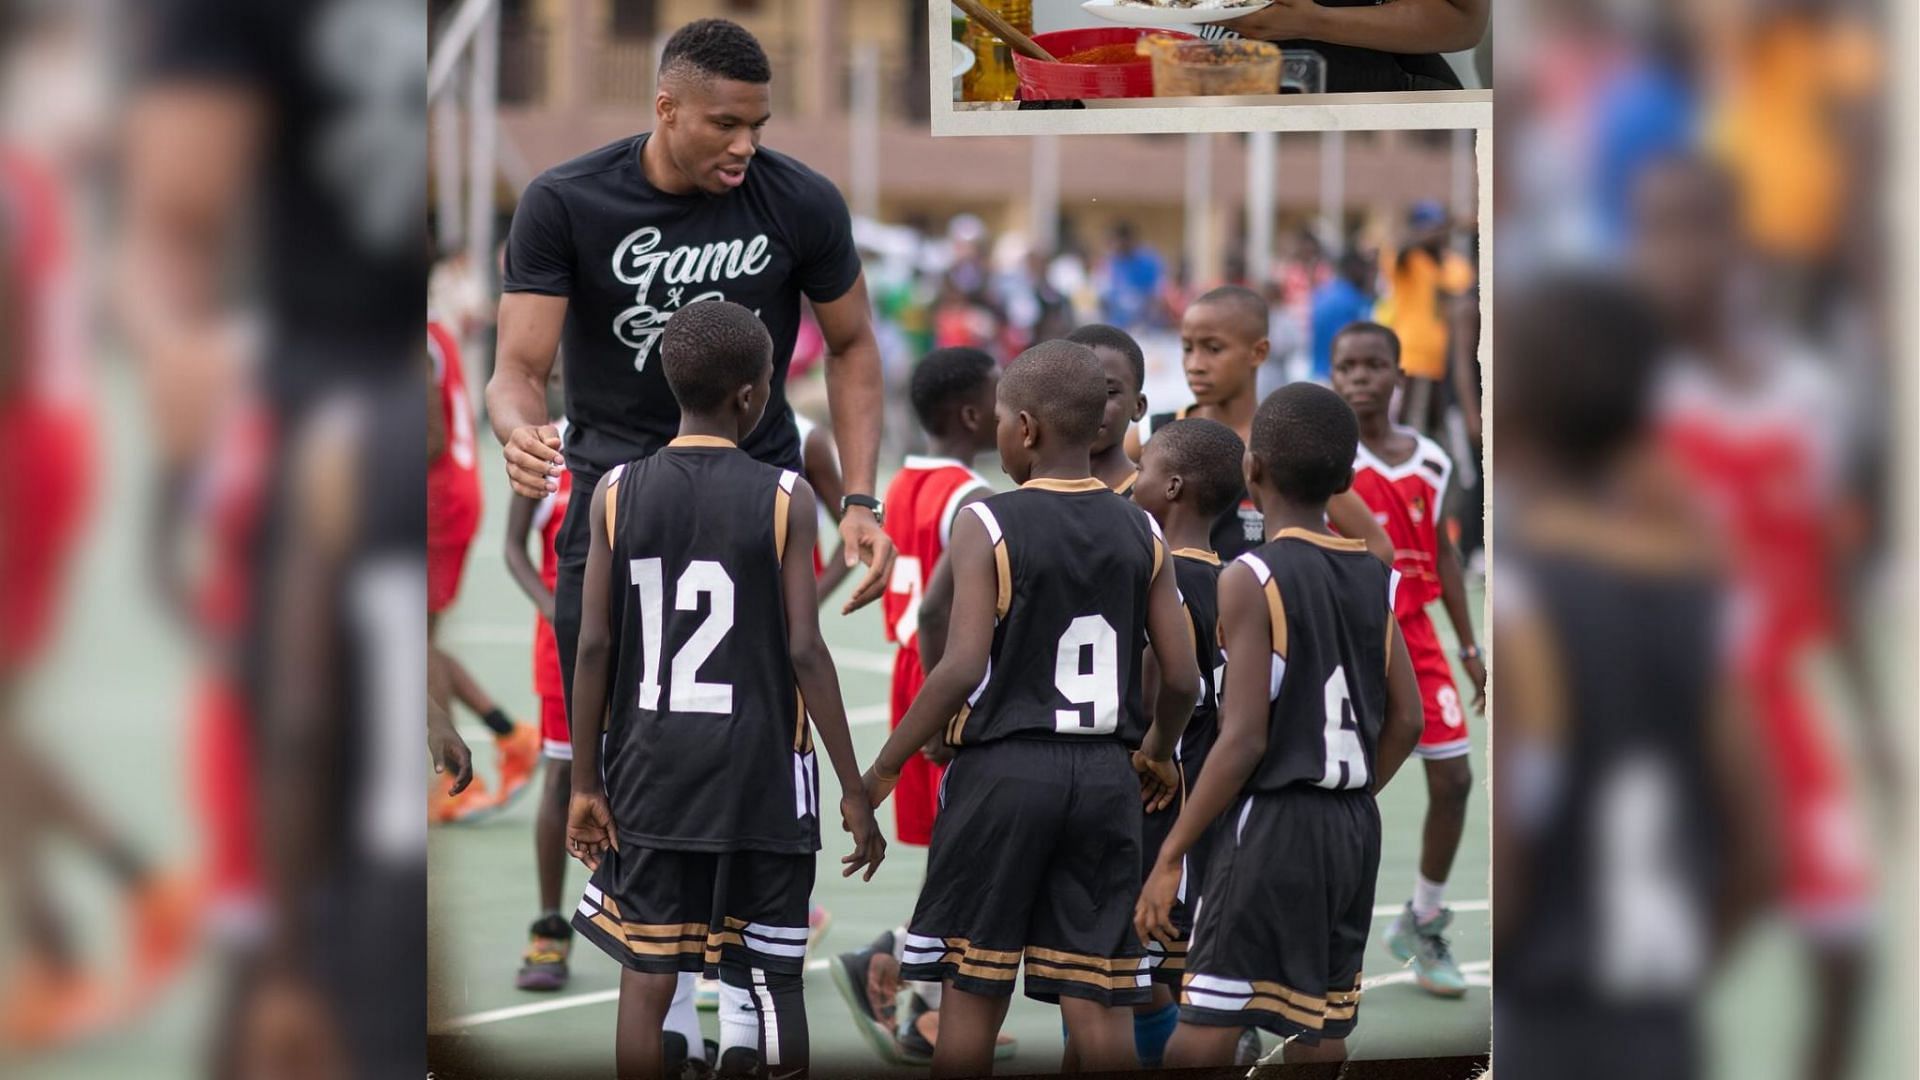 Giannis playing basketball with Nigerian kids